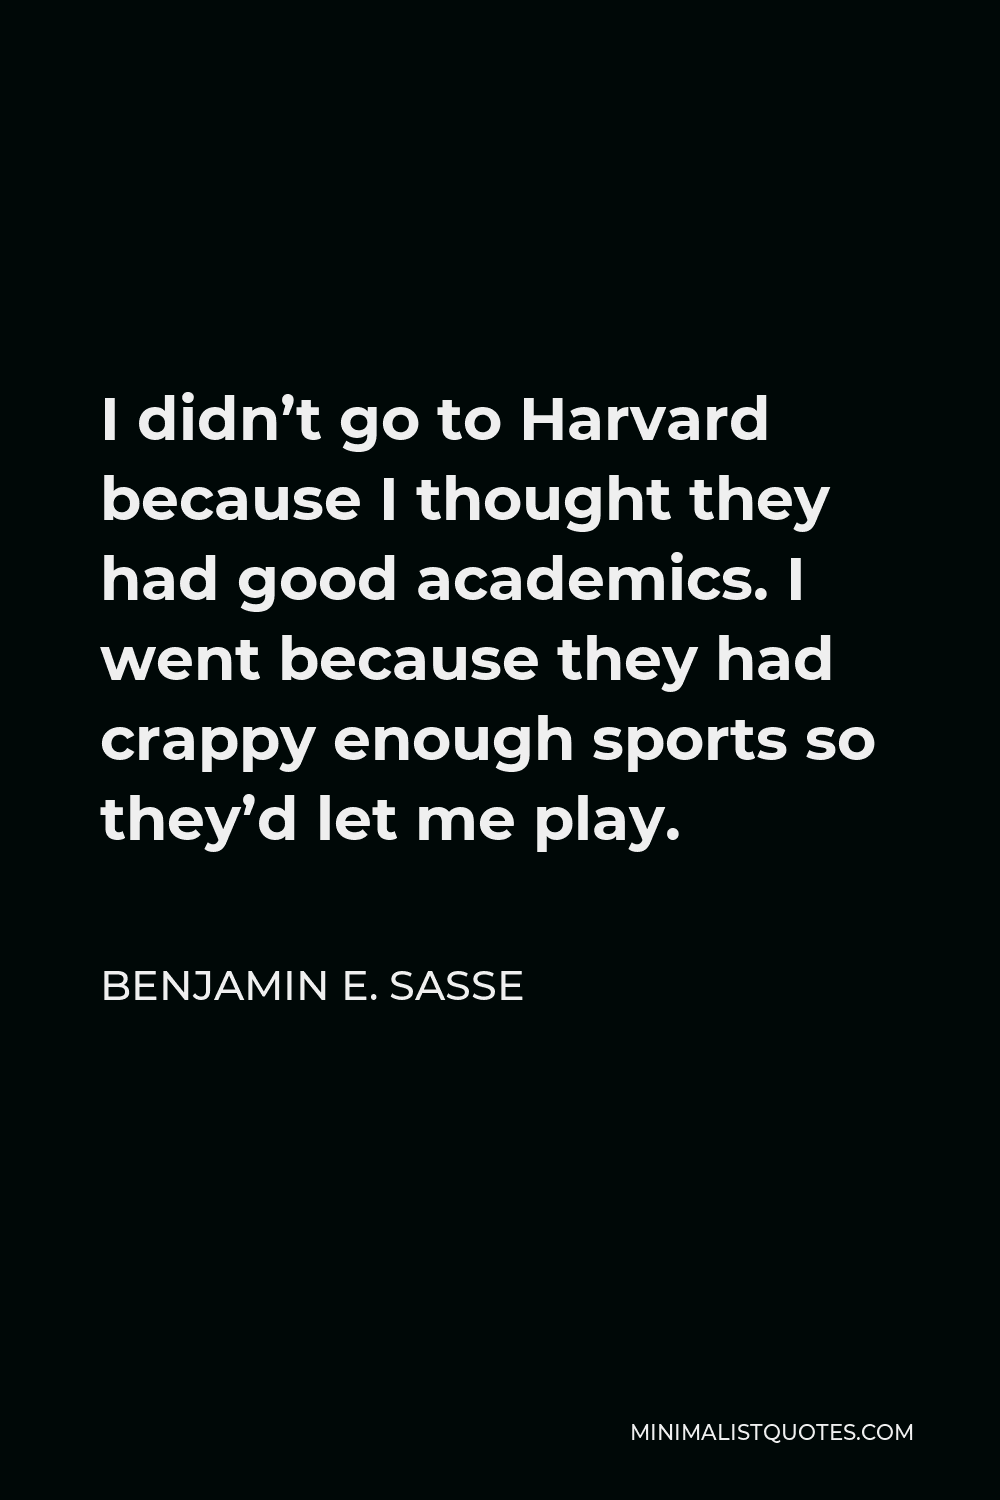 Benjamin E. Sasse Quote - I didn’t go to Harvard because I thought they had good academics. I went because they had crappy enough sports so they’d let me play.